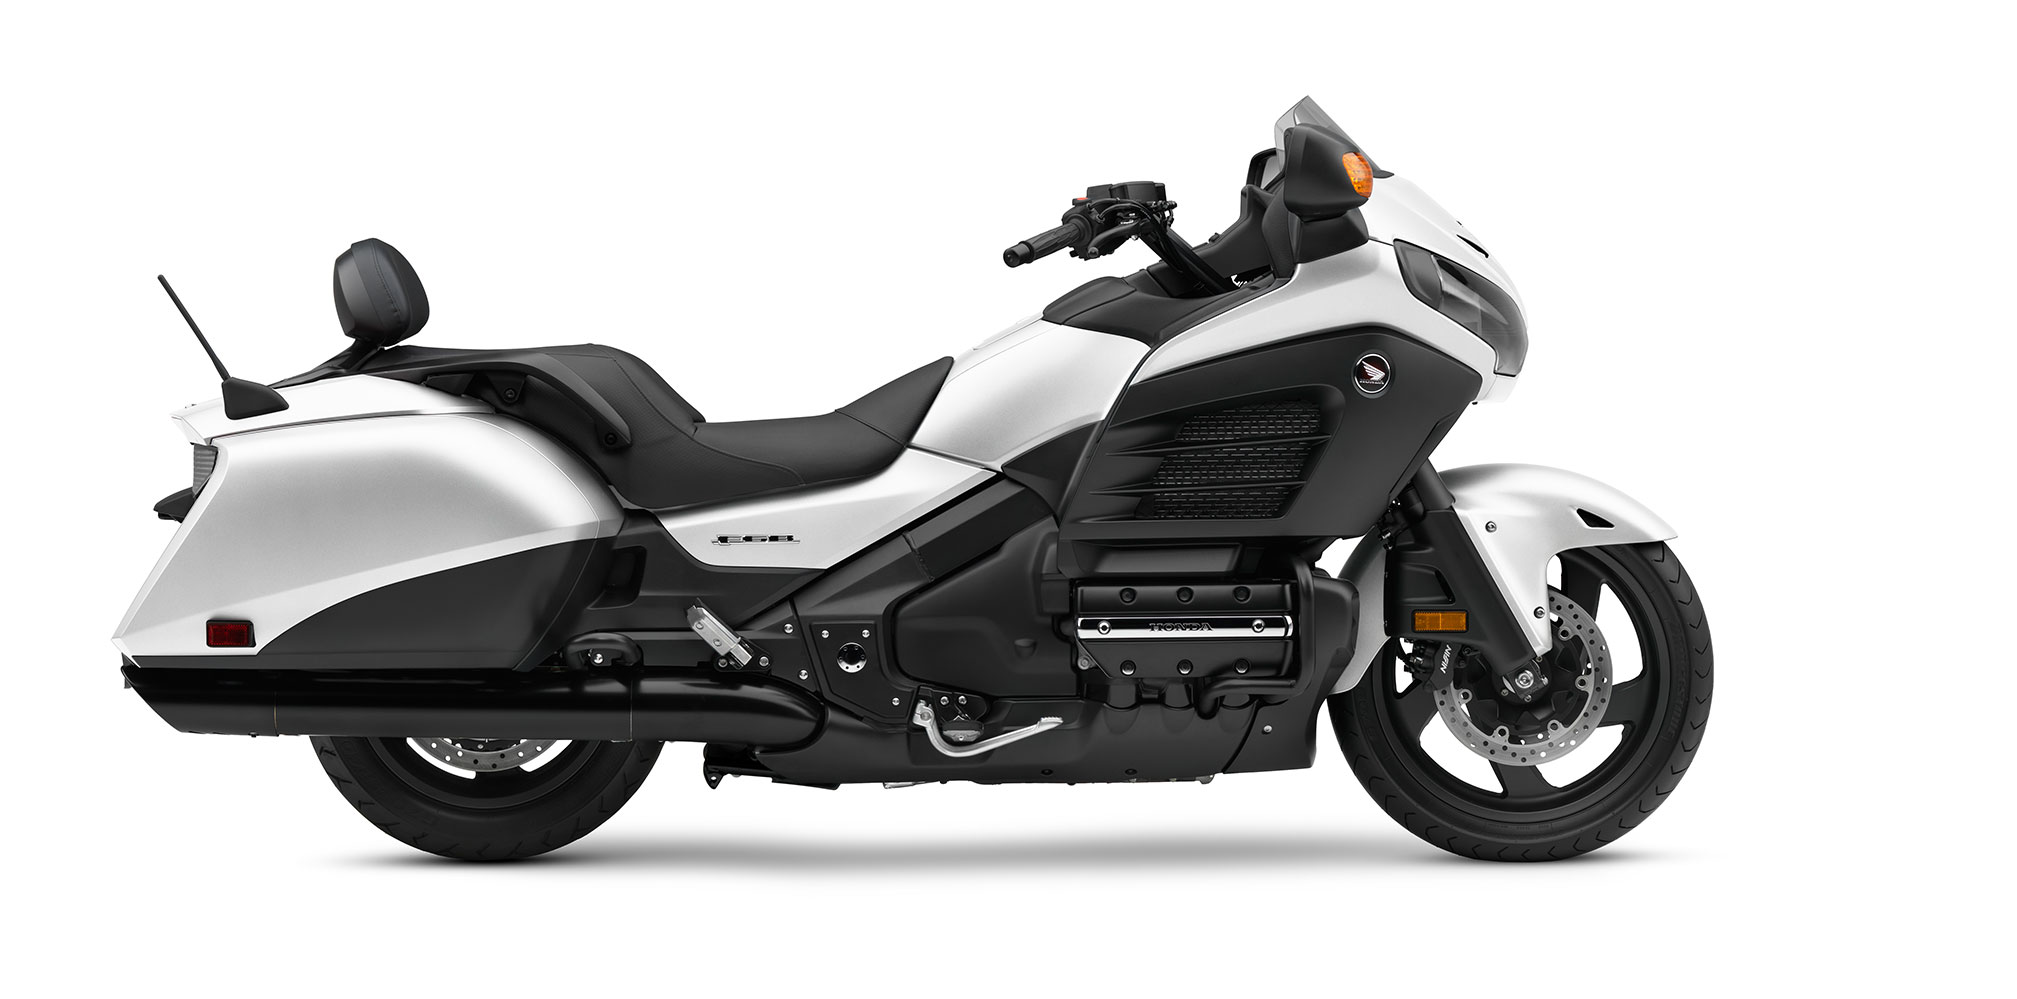 Honda Gold Wing F6B Deluxe 2018 photo - 3